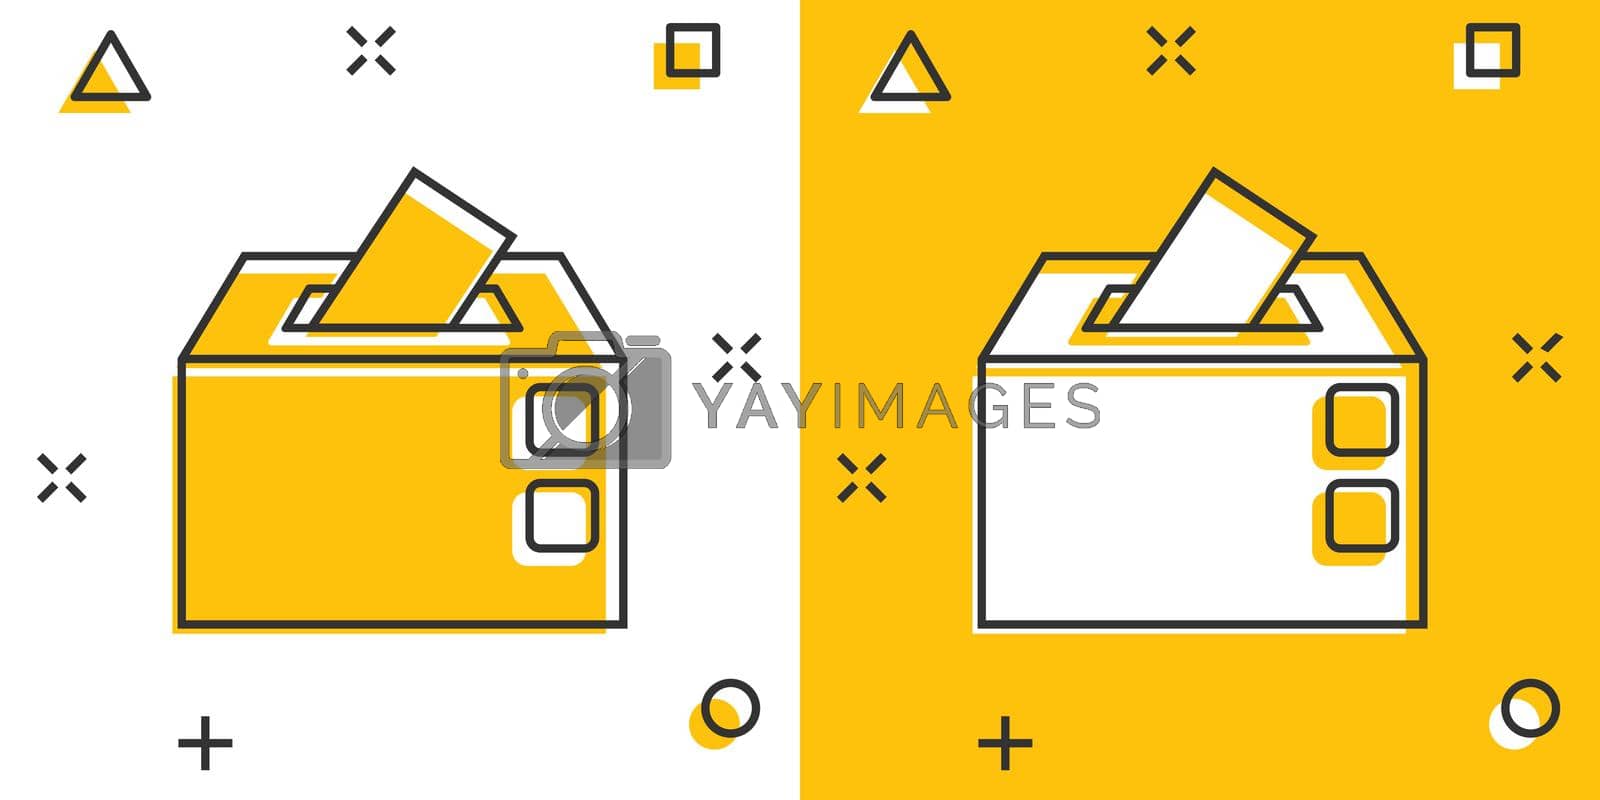 Royalty free image of Election voter box icon in comic style. Ballot suggestion vector cartoon illustration pictogram. Election vote business concept splash effect. by LysenkoA